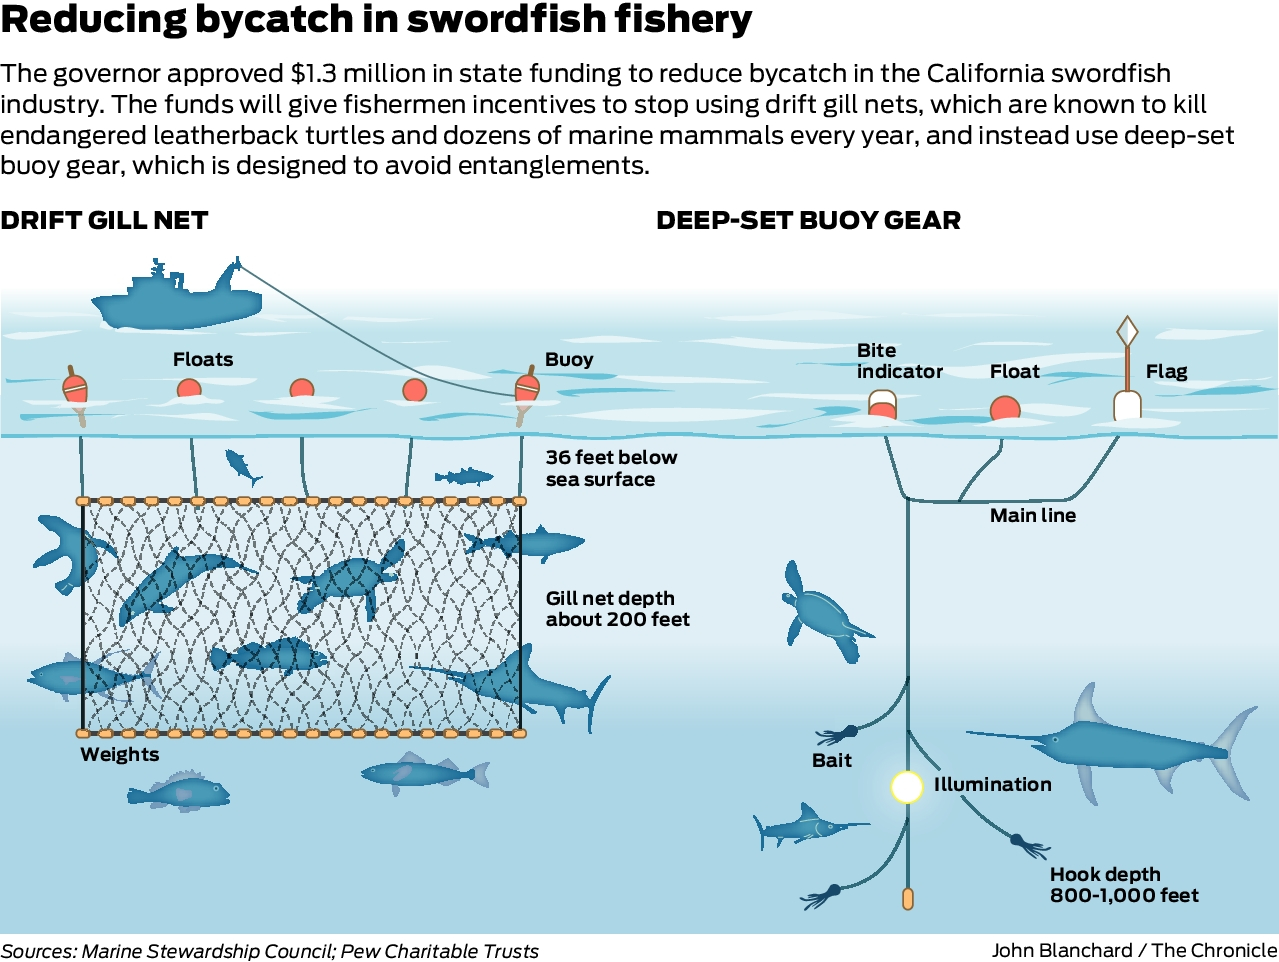 New law phases out fishing gear that kills dolphins and whales off